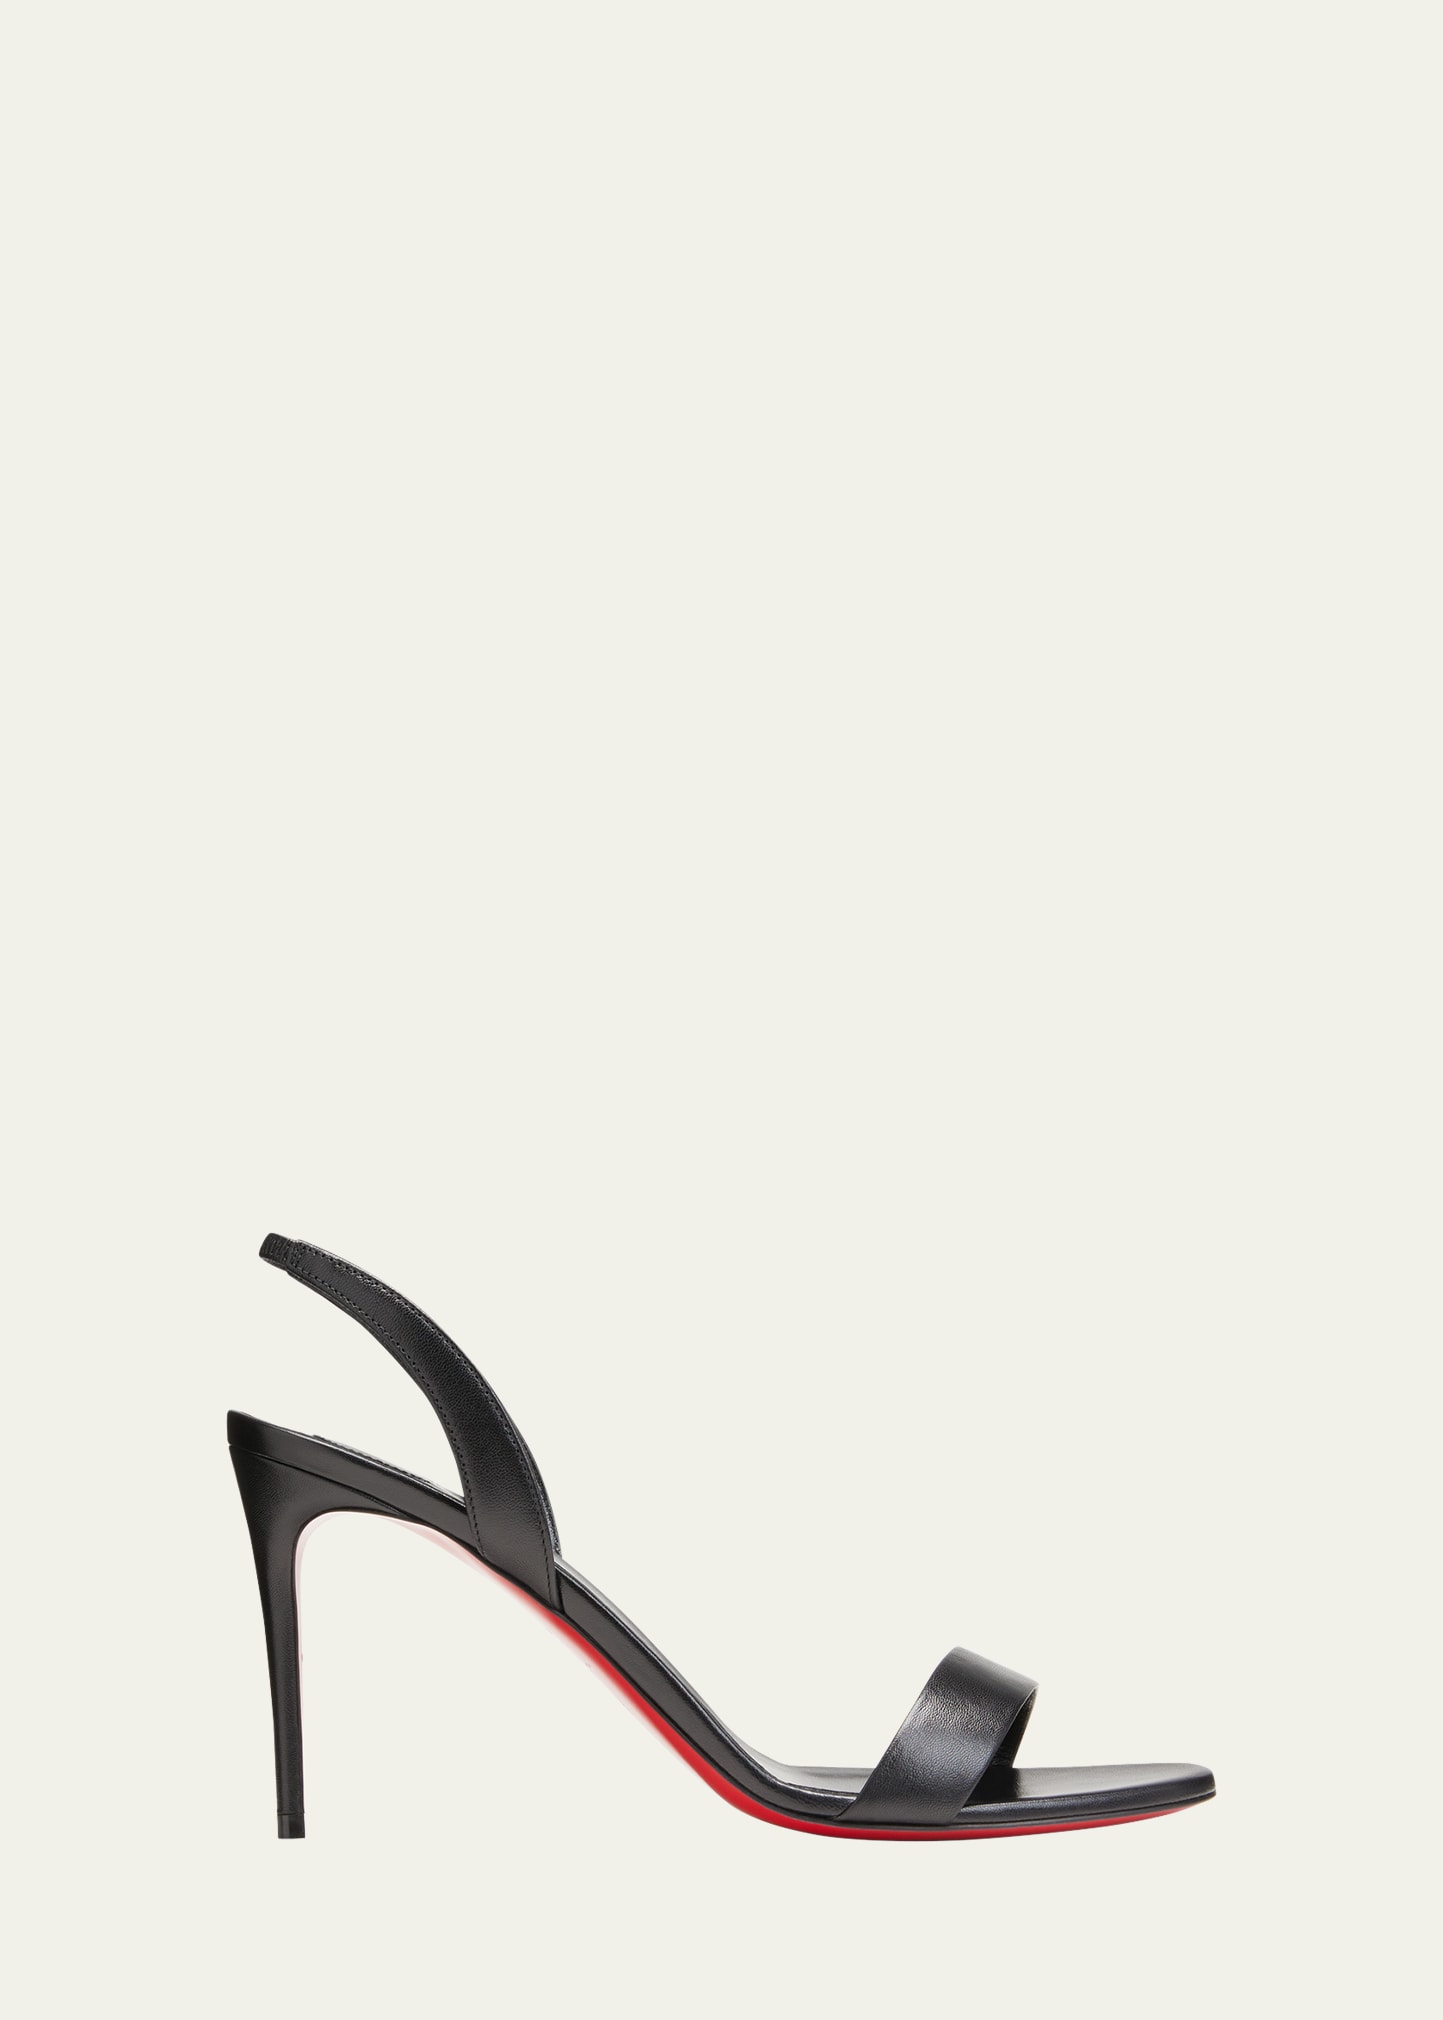 CHRISTIAN LOUBOUTIN O MARILYN RED SOLE SLINGBACK SANDALS